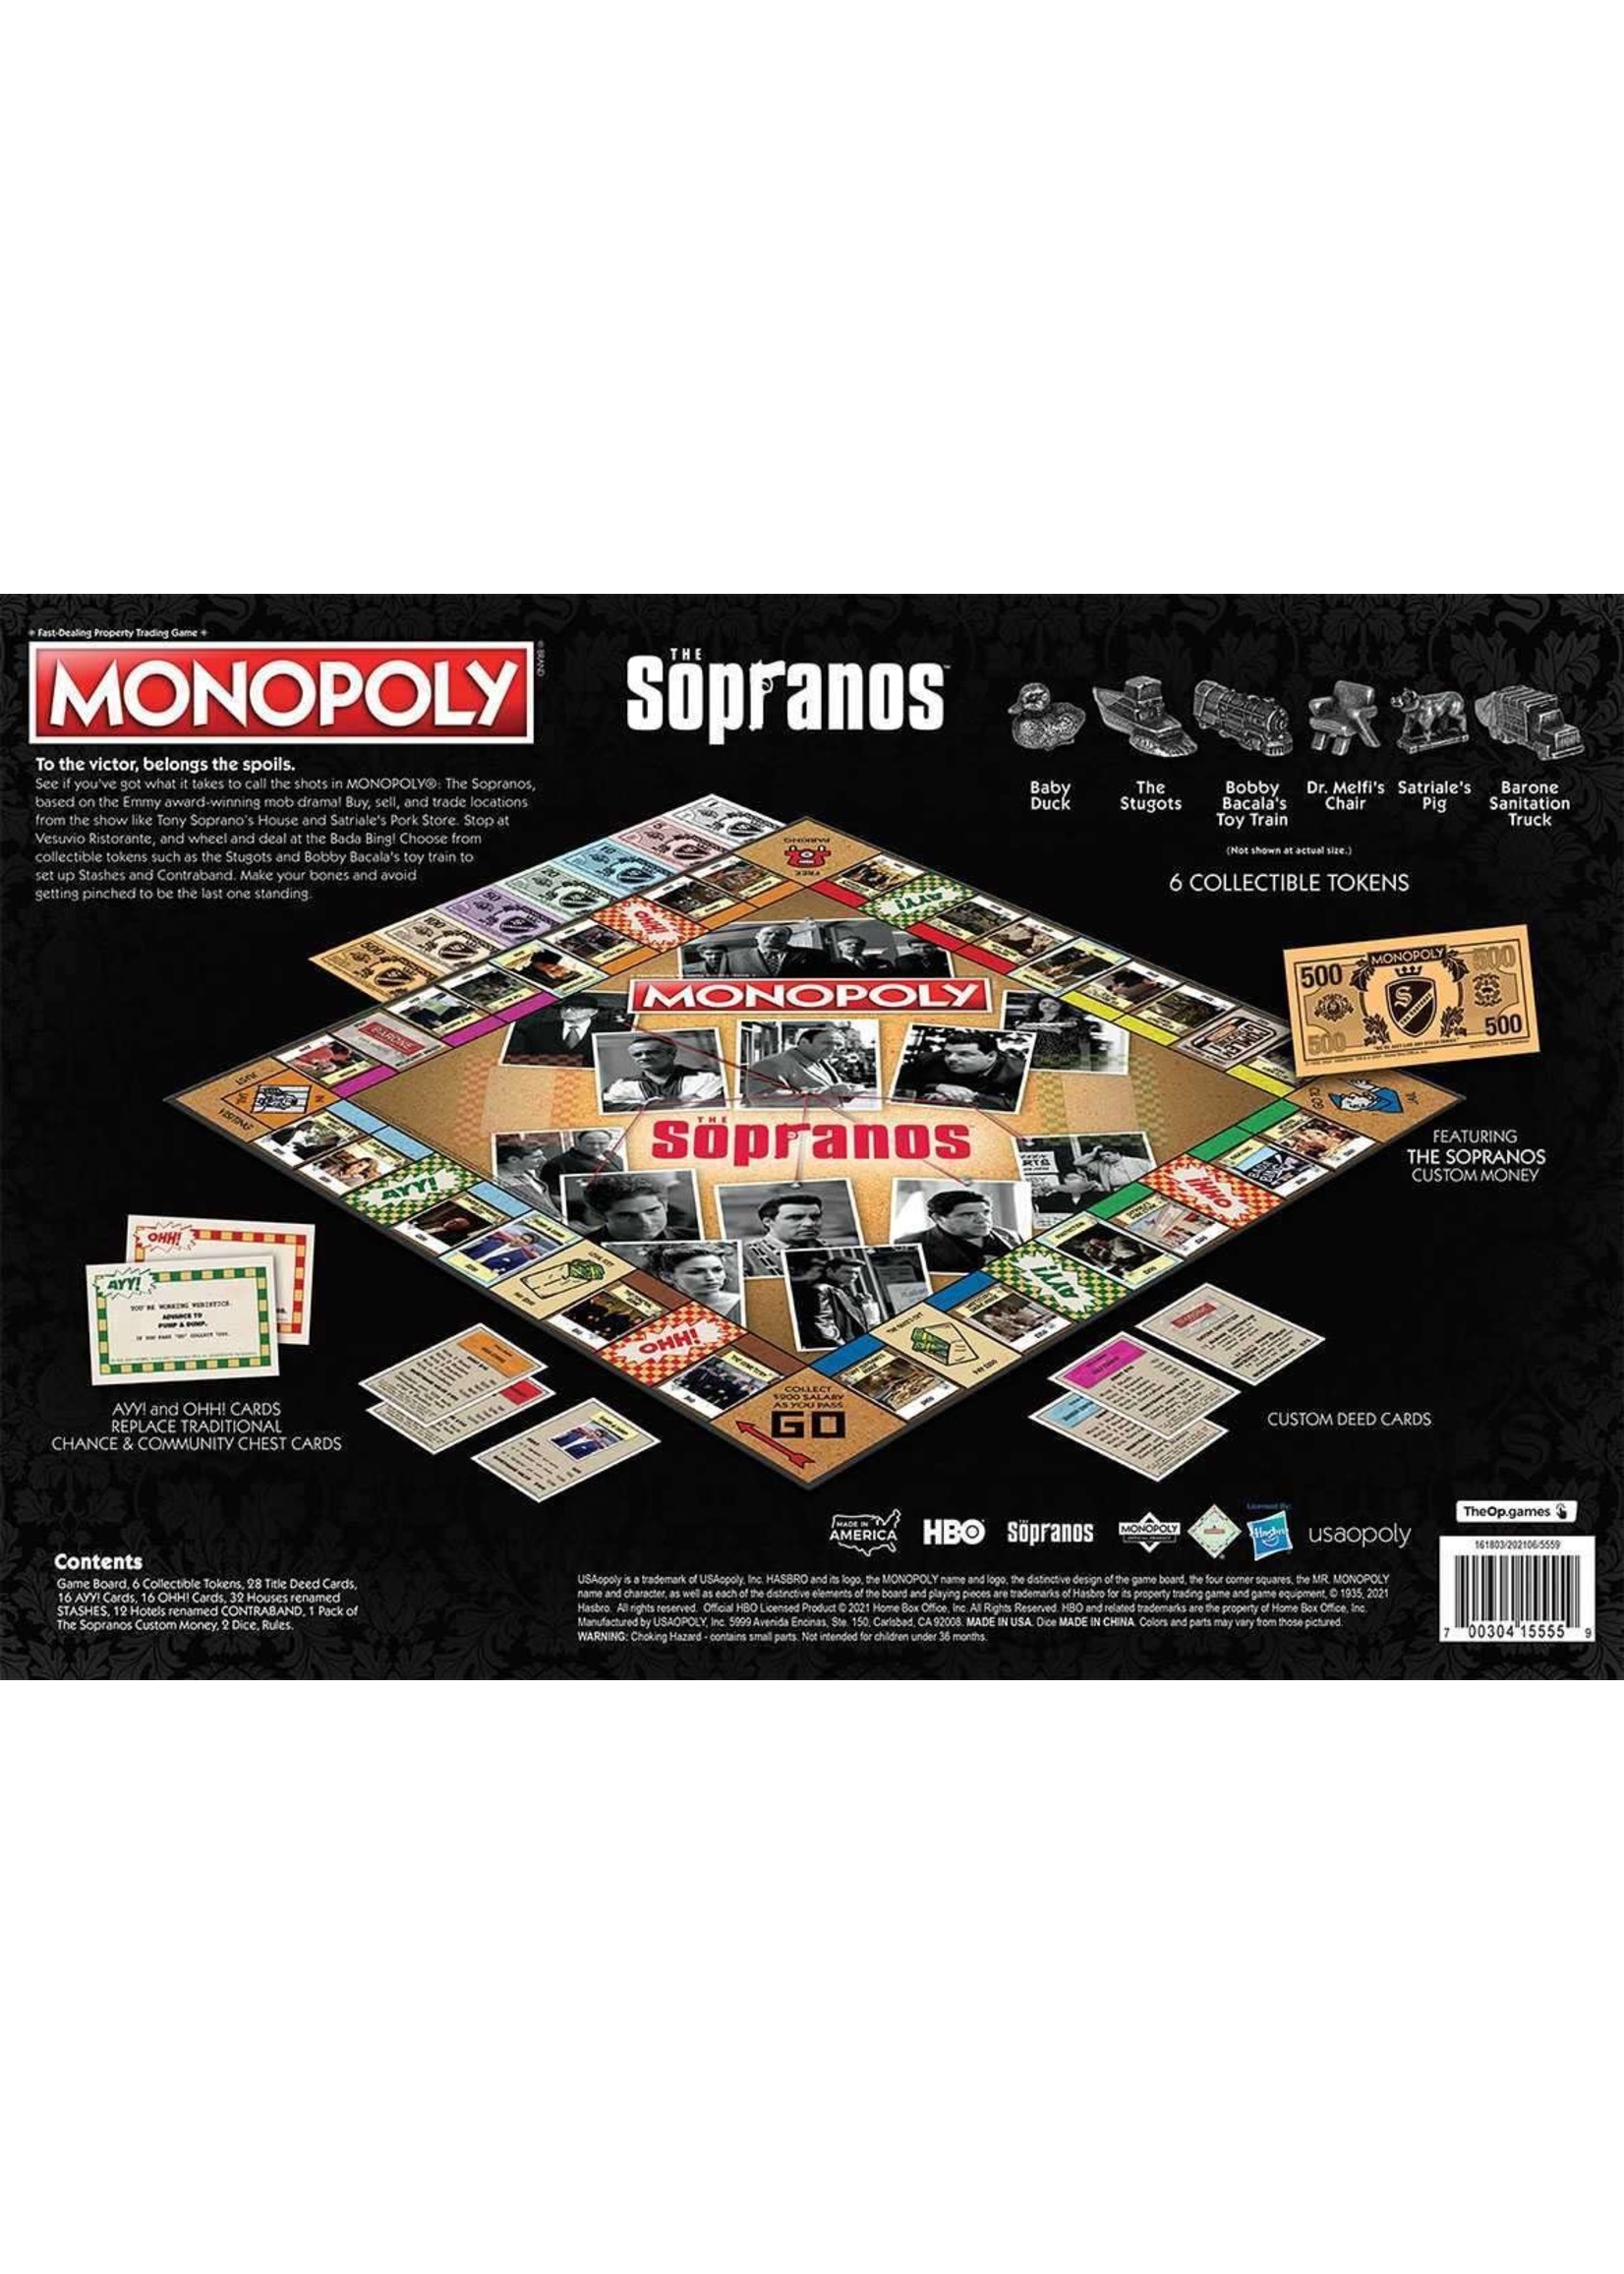 The OP Games Monopoly Sopranos